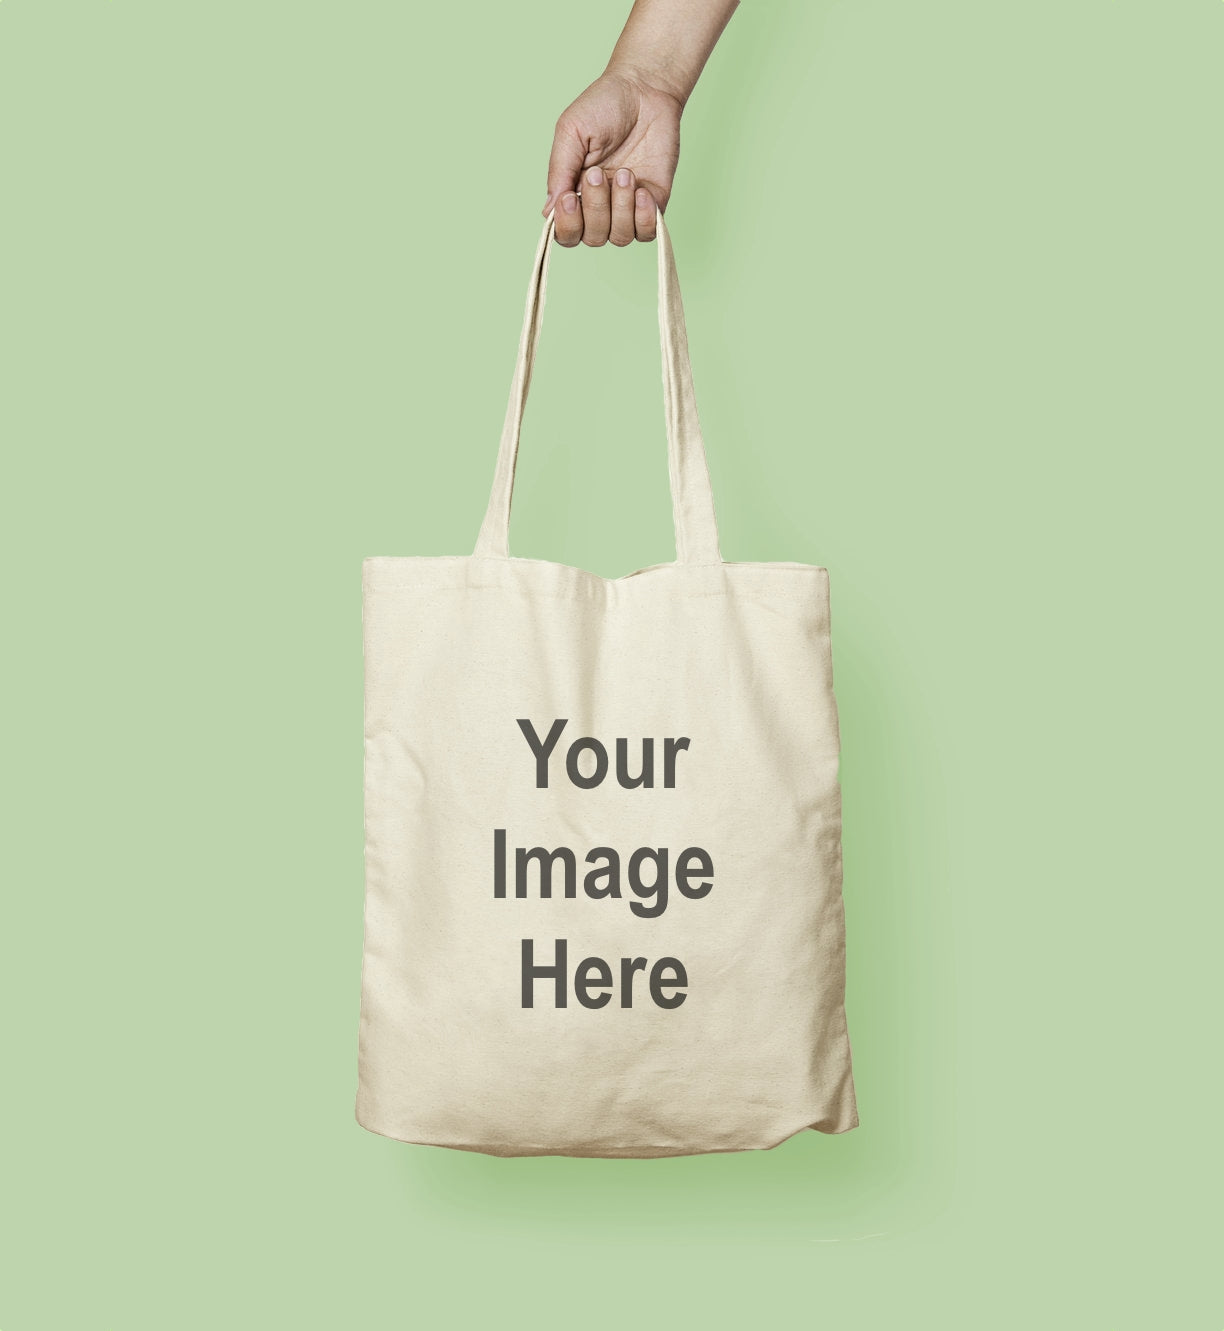 Tote Bags, See all our tote bags here